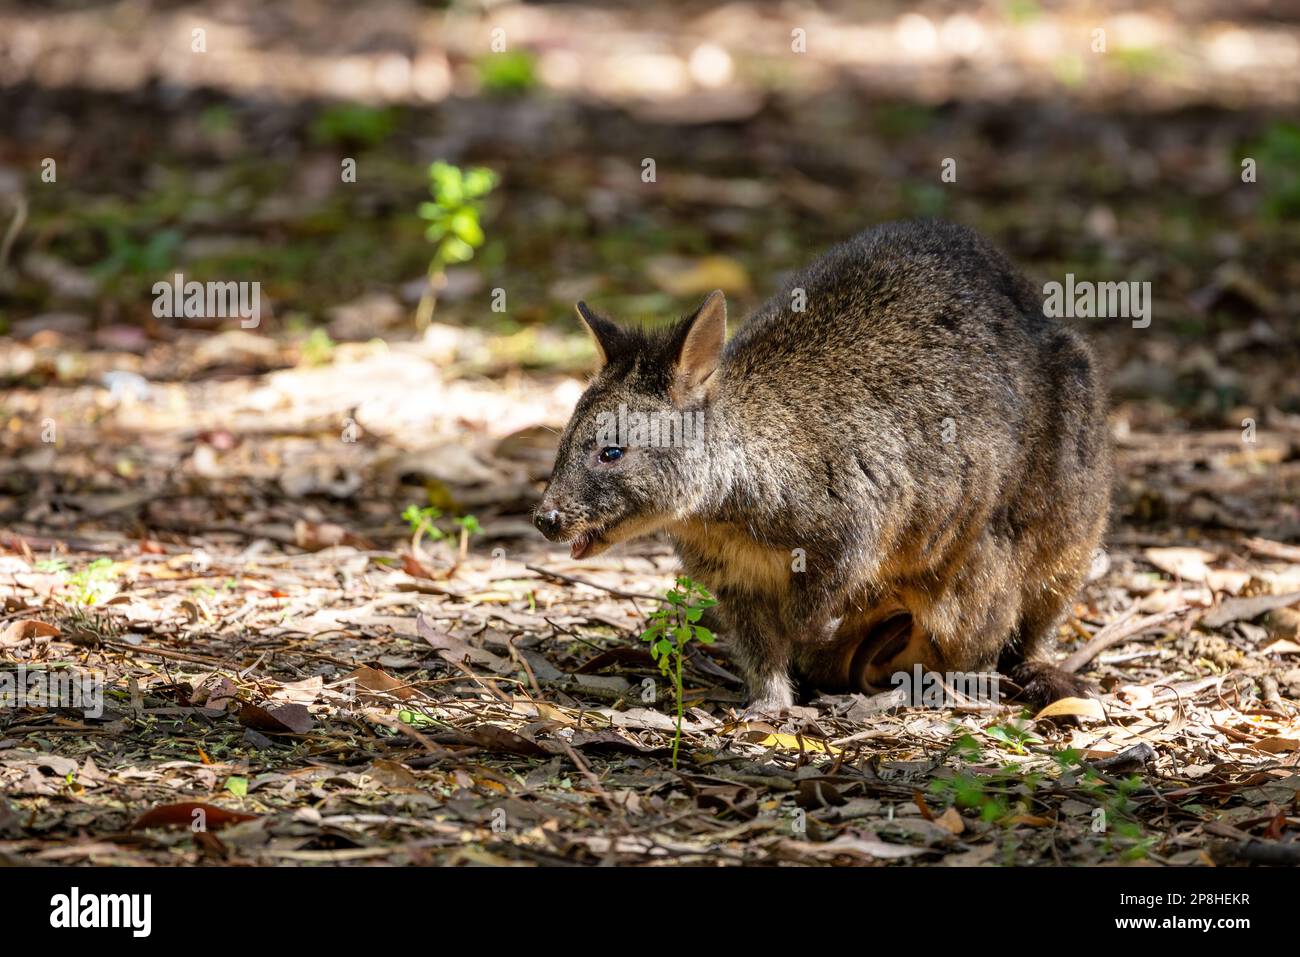 A Tasmanian pademelon, thylogale billardierii, also known as the rufous-bellied or red-bellied pademelon, is the sole species of pademelon found in Ta Stock Photo